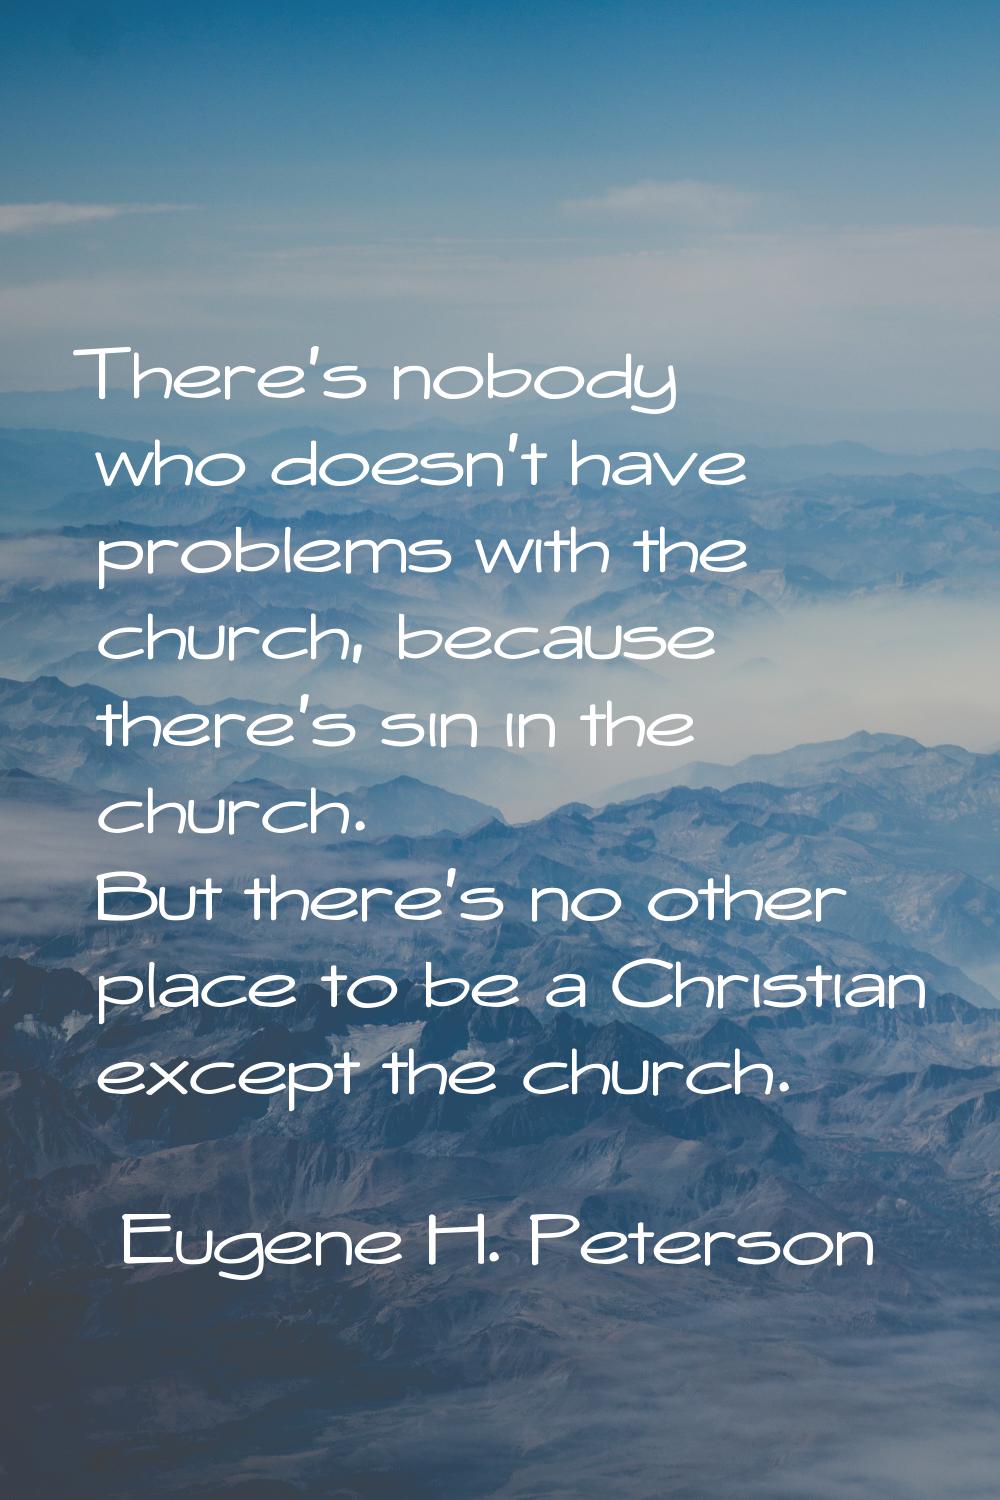 There's nobody who doesn't have problems with the church, because there's sin in the church. But th